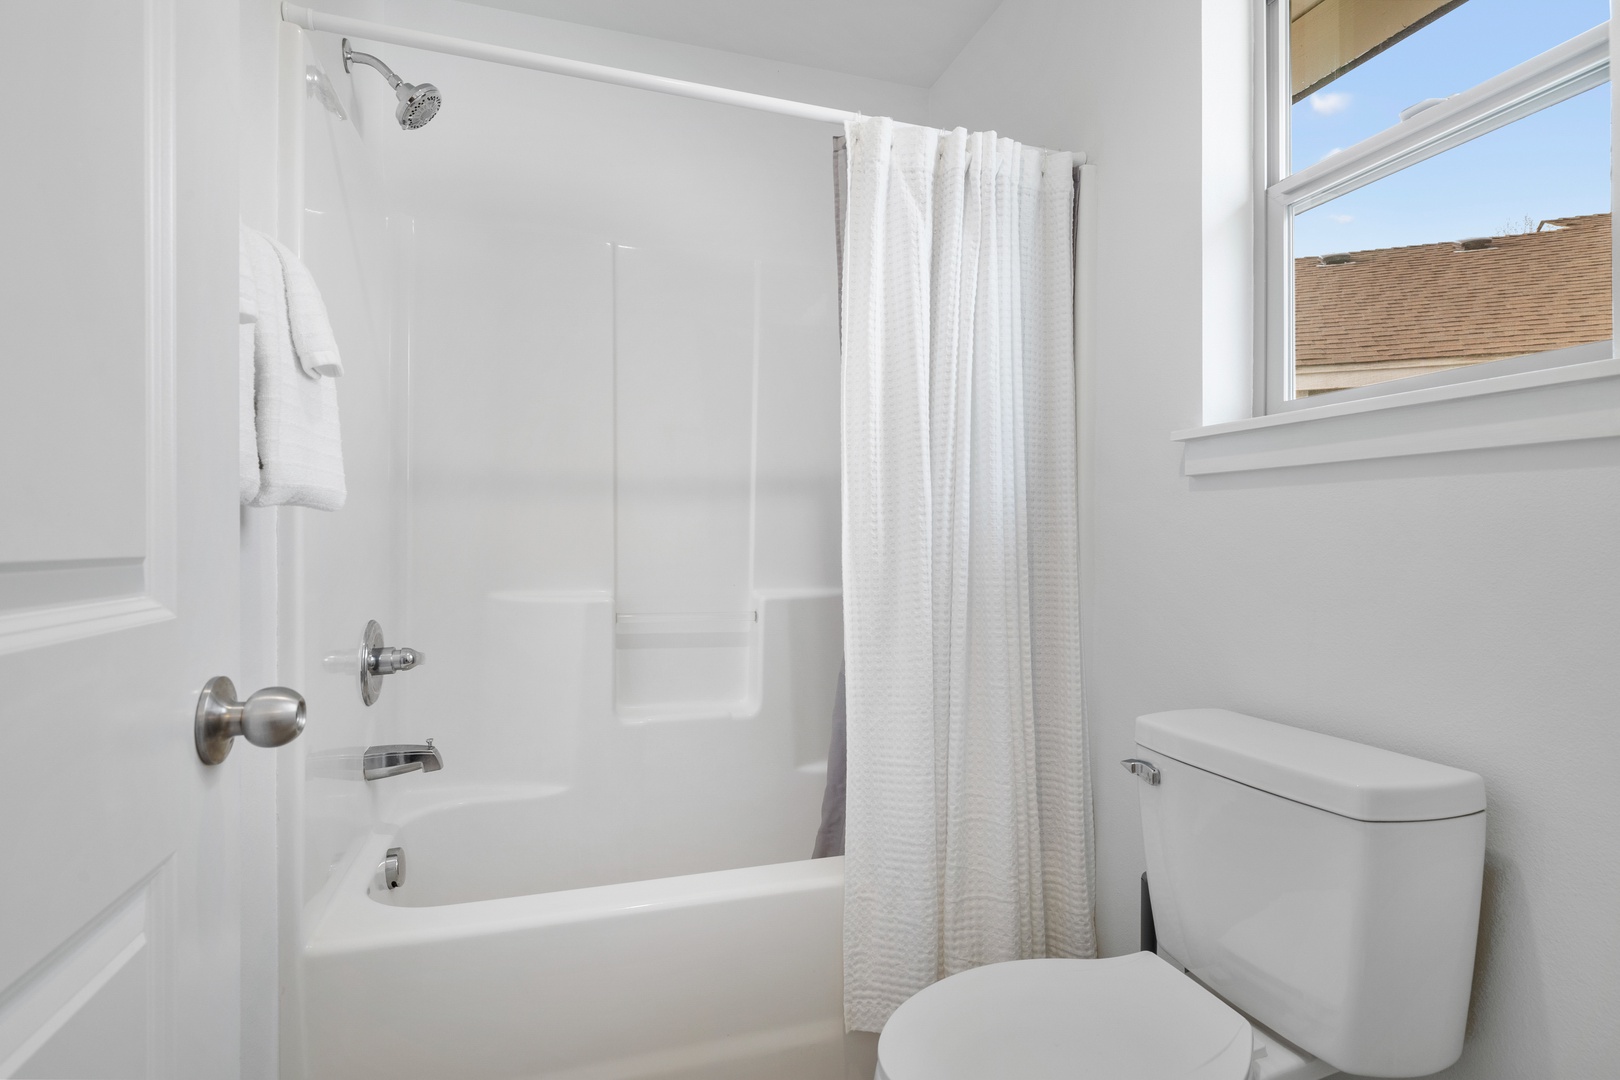 The 2nd floor hall bath offers a large vanity & shower/tub combo